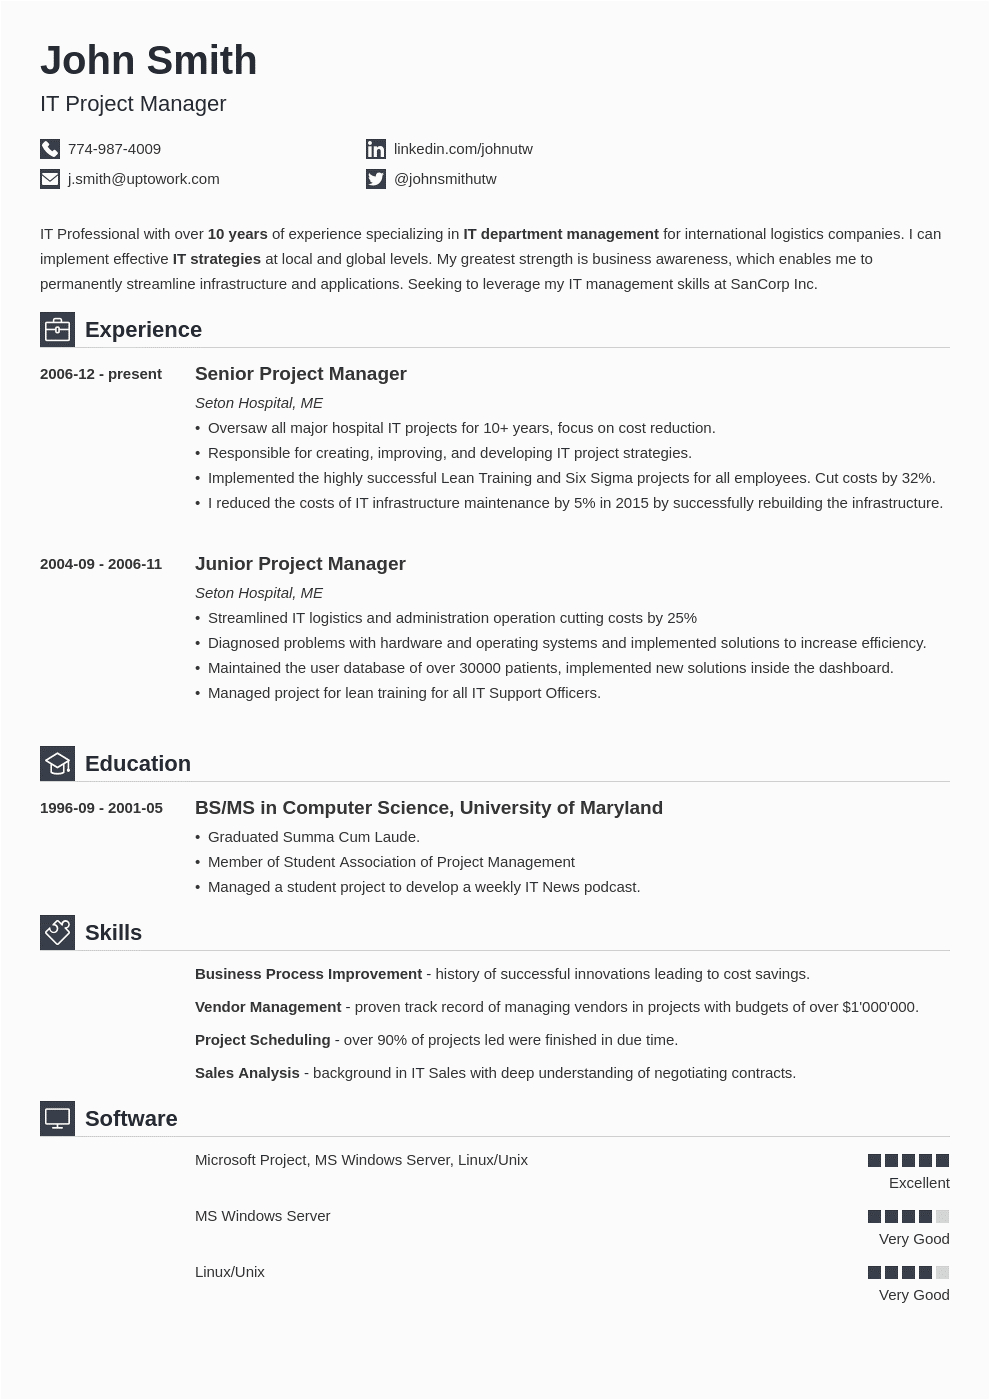 Sample Resume for Ms In Us with Work Experience 25 Free Resume Templates for Microsoft Word to Download